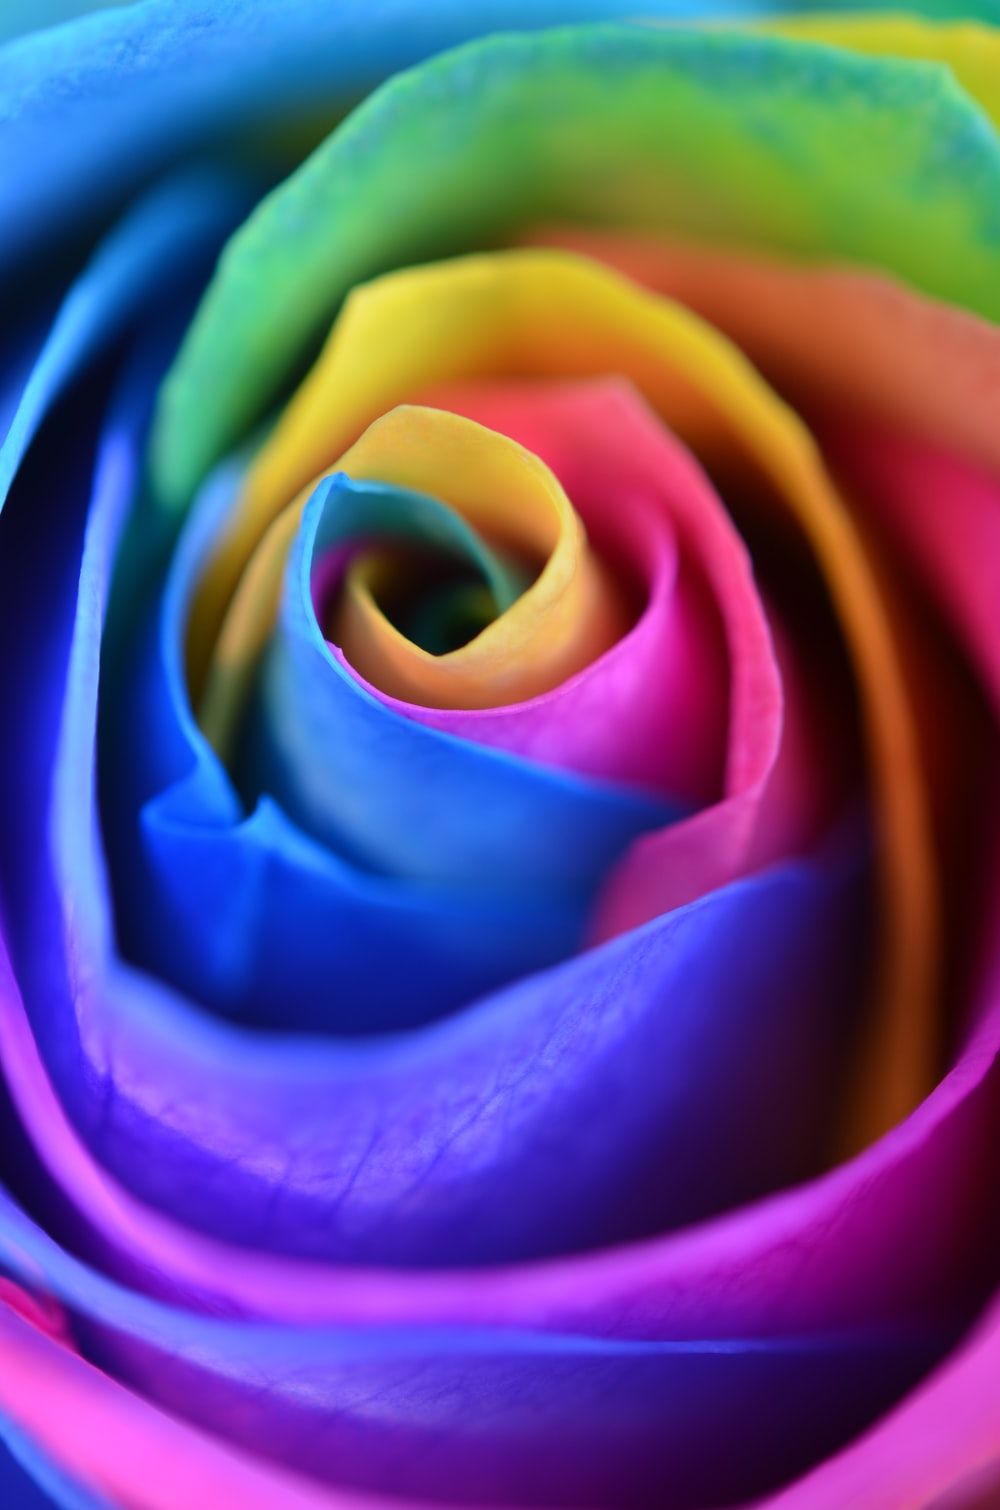 Rainbow Roses Wallpapers 4k Hd Rainbow Roses Backgrounds On Wallpaperbat